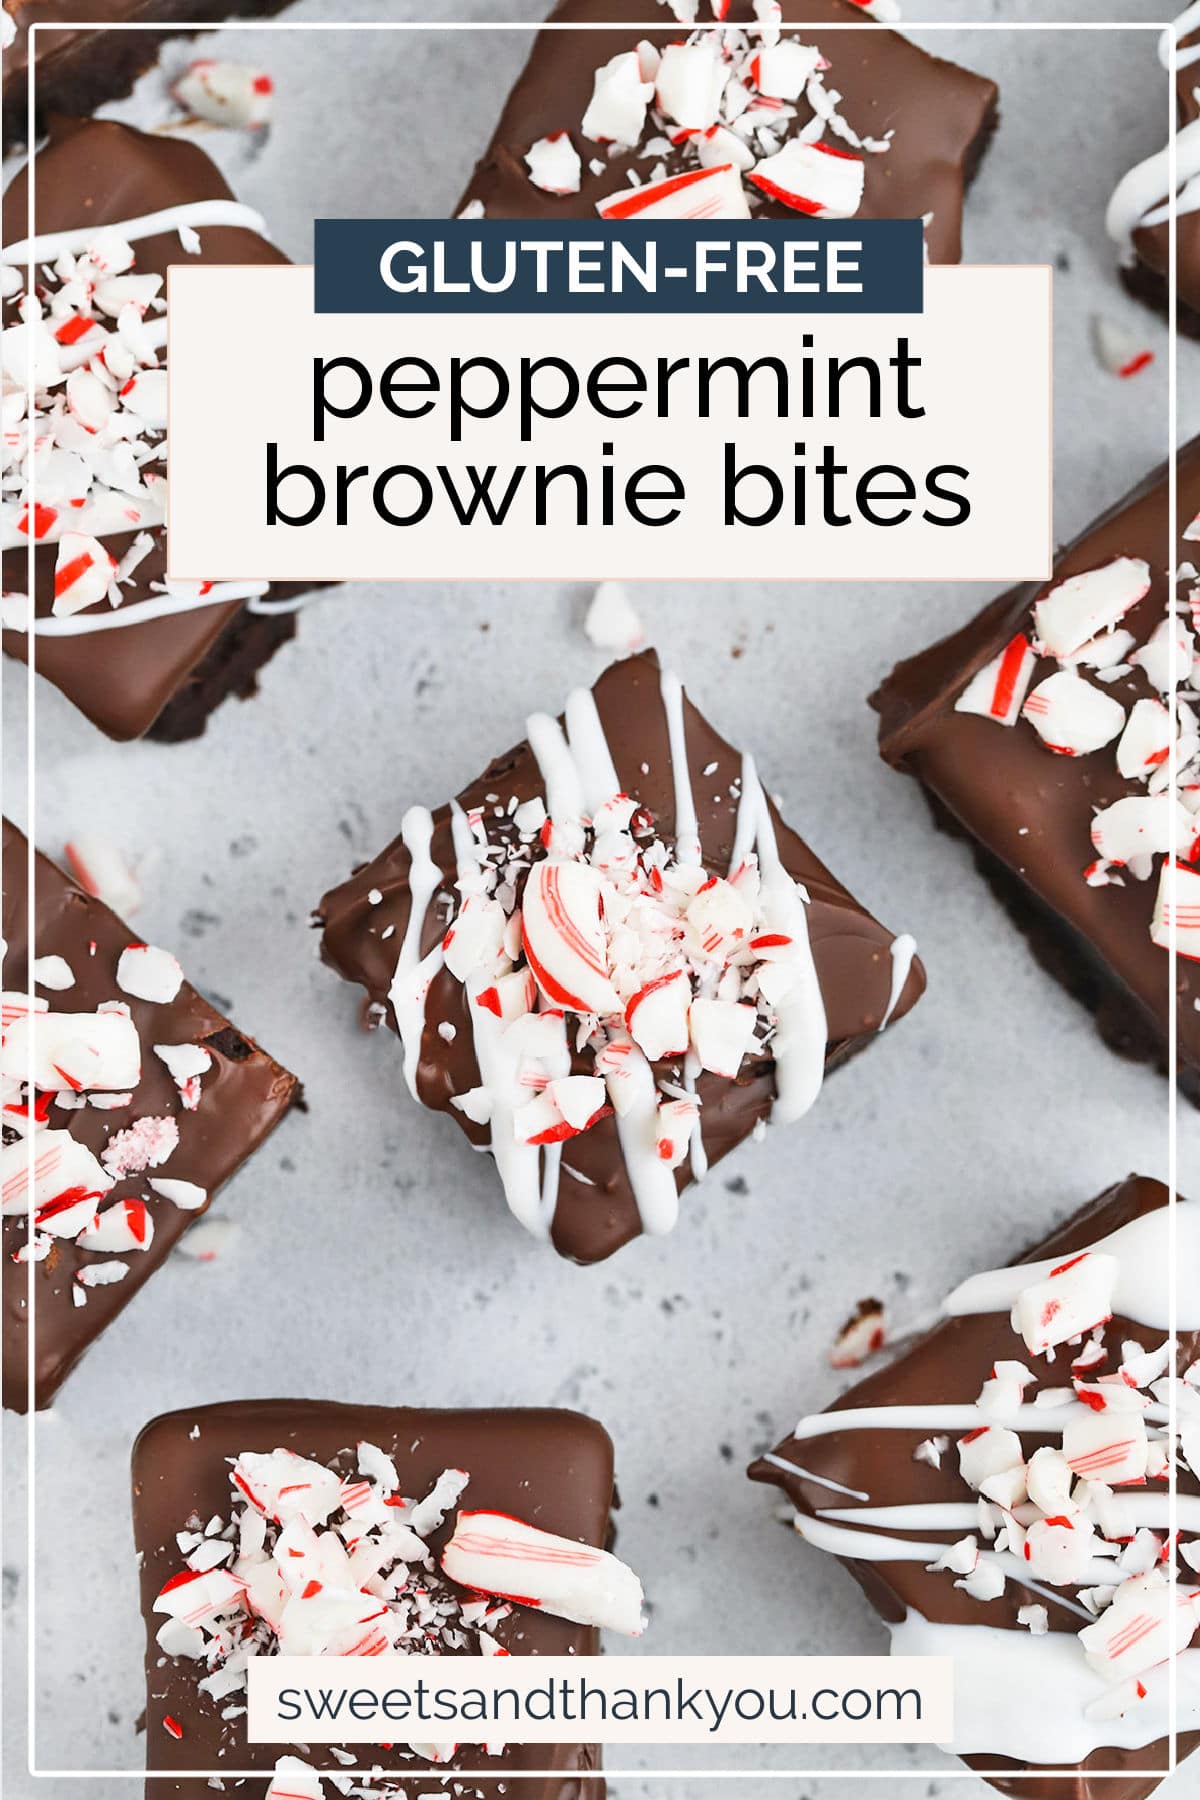  Gluten-Free Peppermint Brownie Bites - These gluten-free brownie bites are dipped in chocolate & coated with crunchy peppermint bits! // Gluten-free peppermint brownies // gluten-free brownie bites recipe // gluten-free christmas cookies // gluten-free holiday dessert // gluten-free christmas recipes